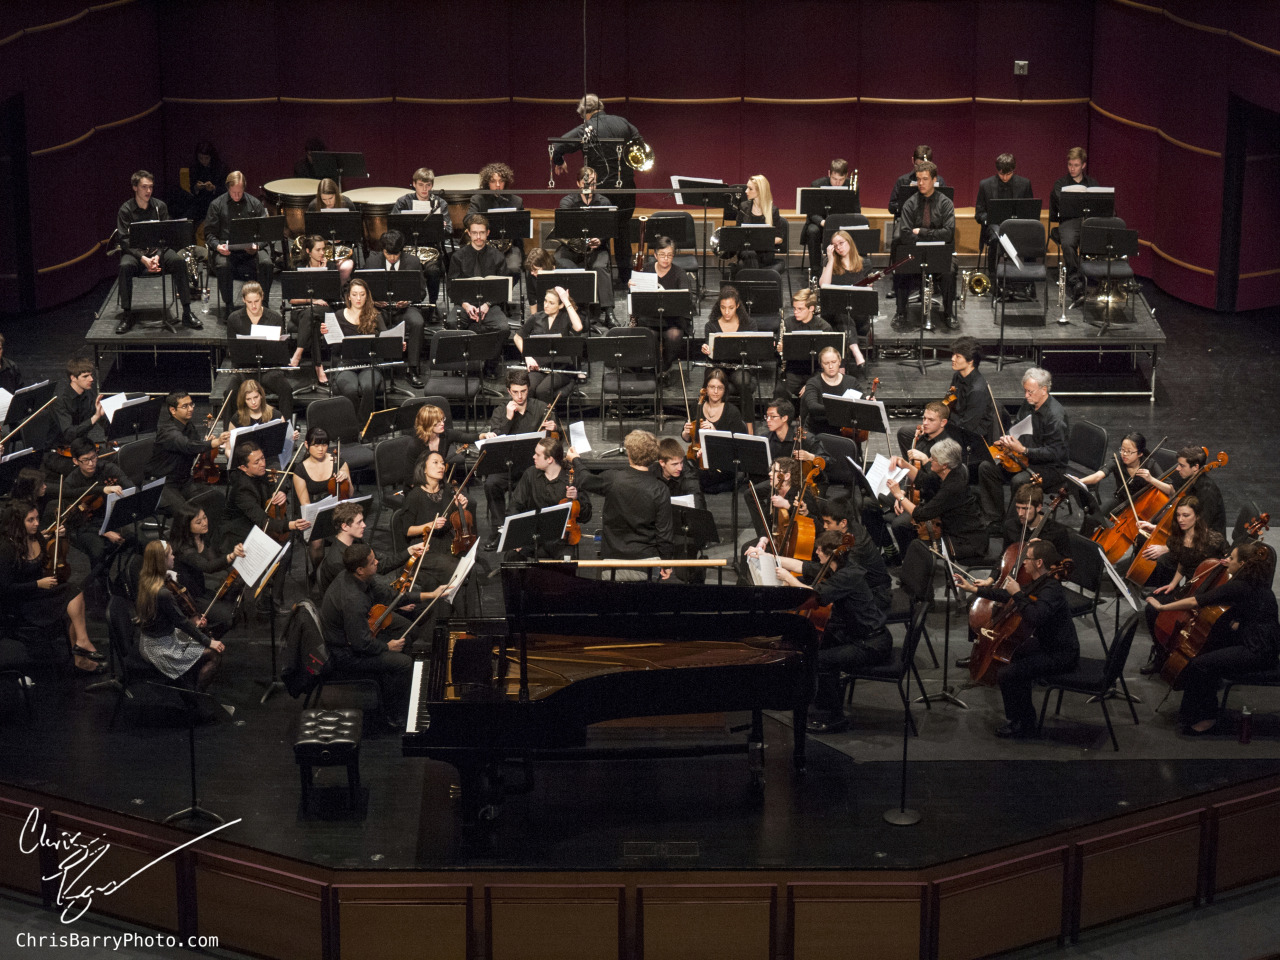 A second picture of the Lehigh Philharmonic rehearsal on Friday, February 15 2014